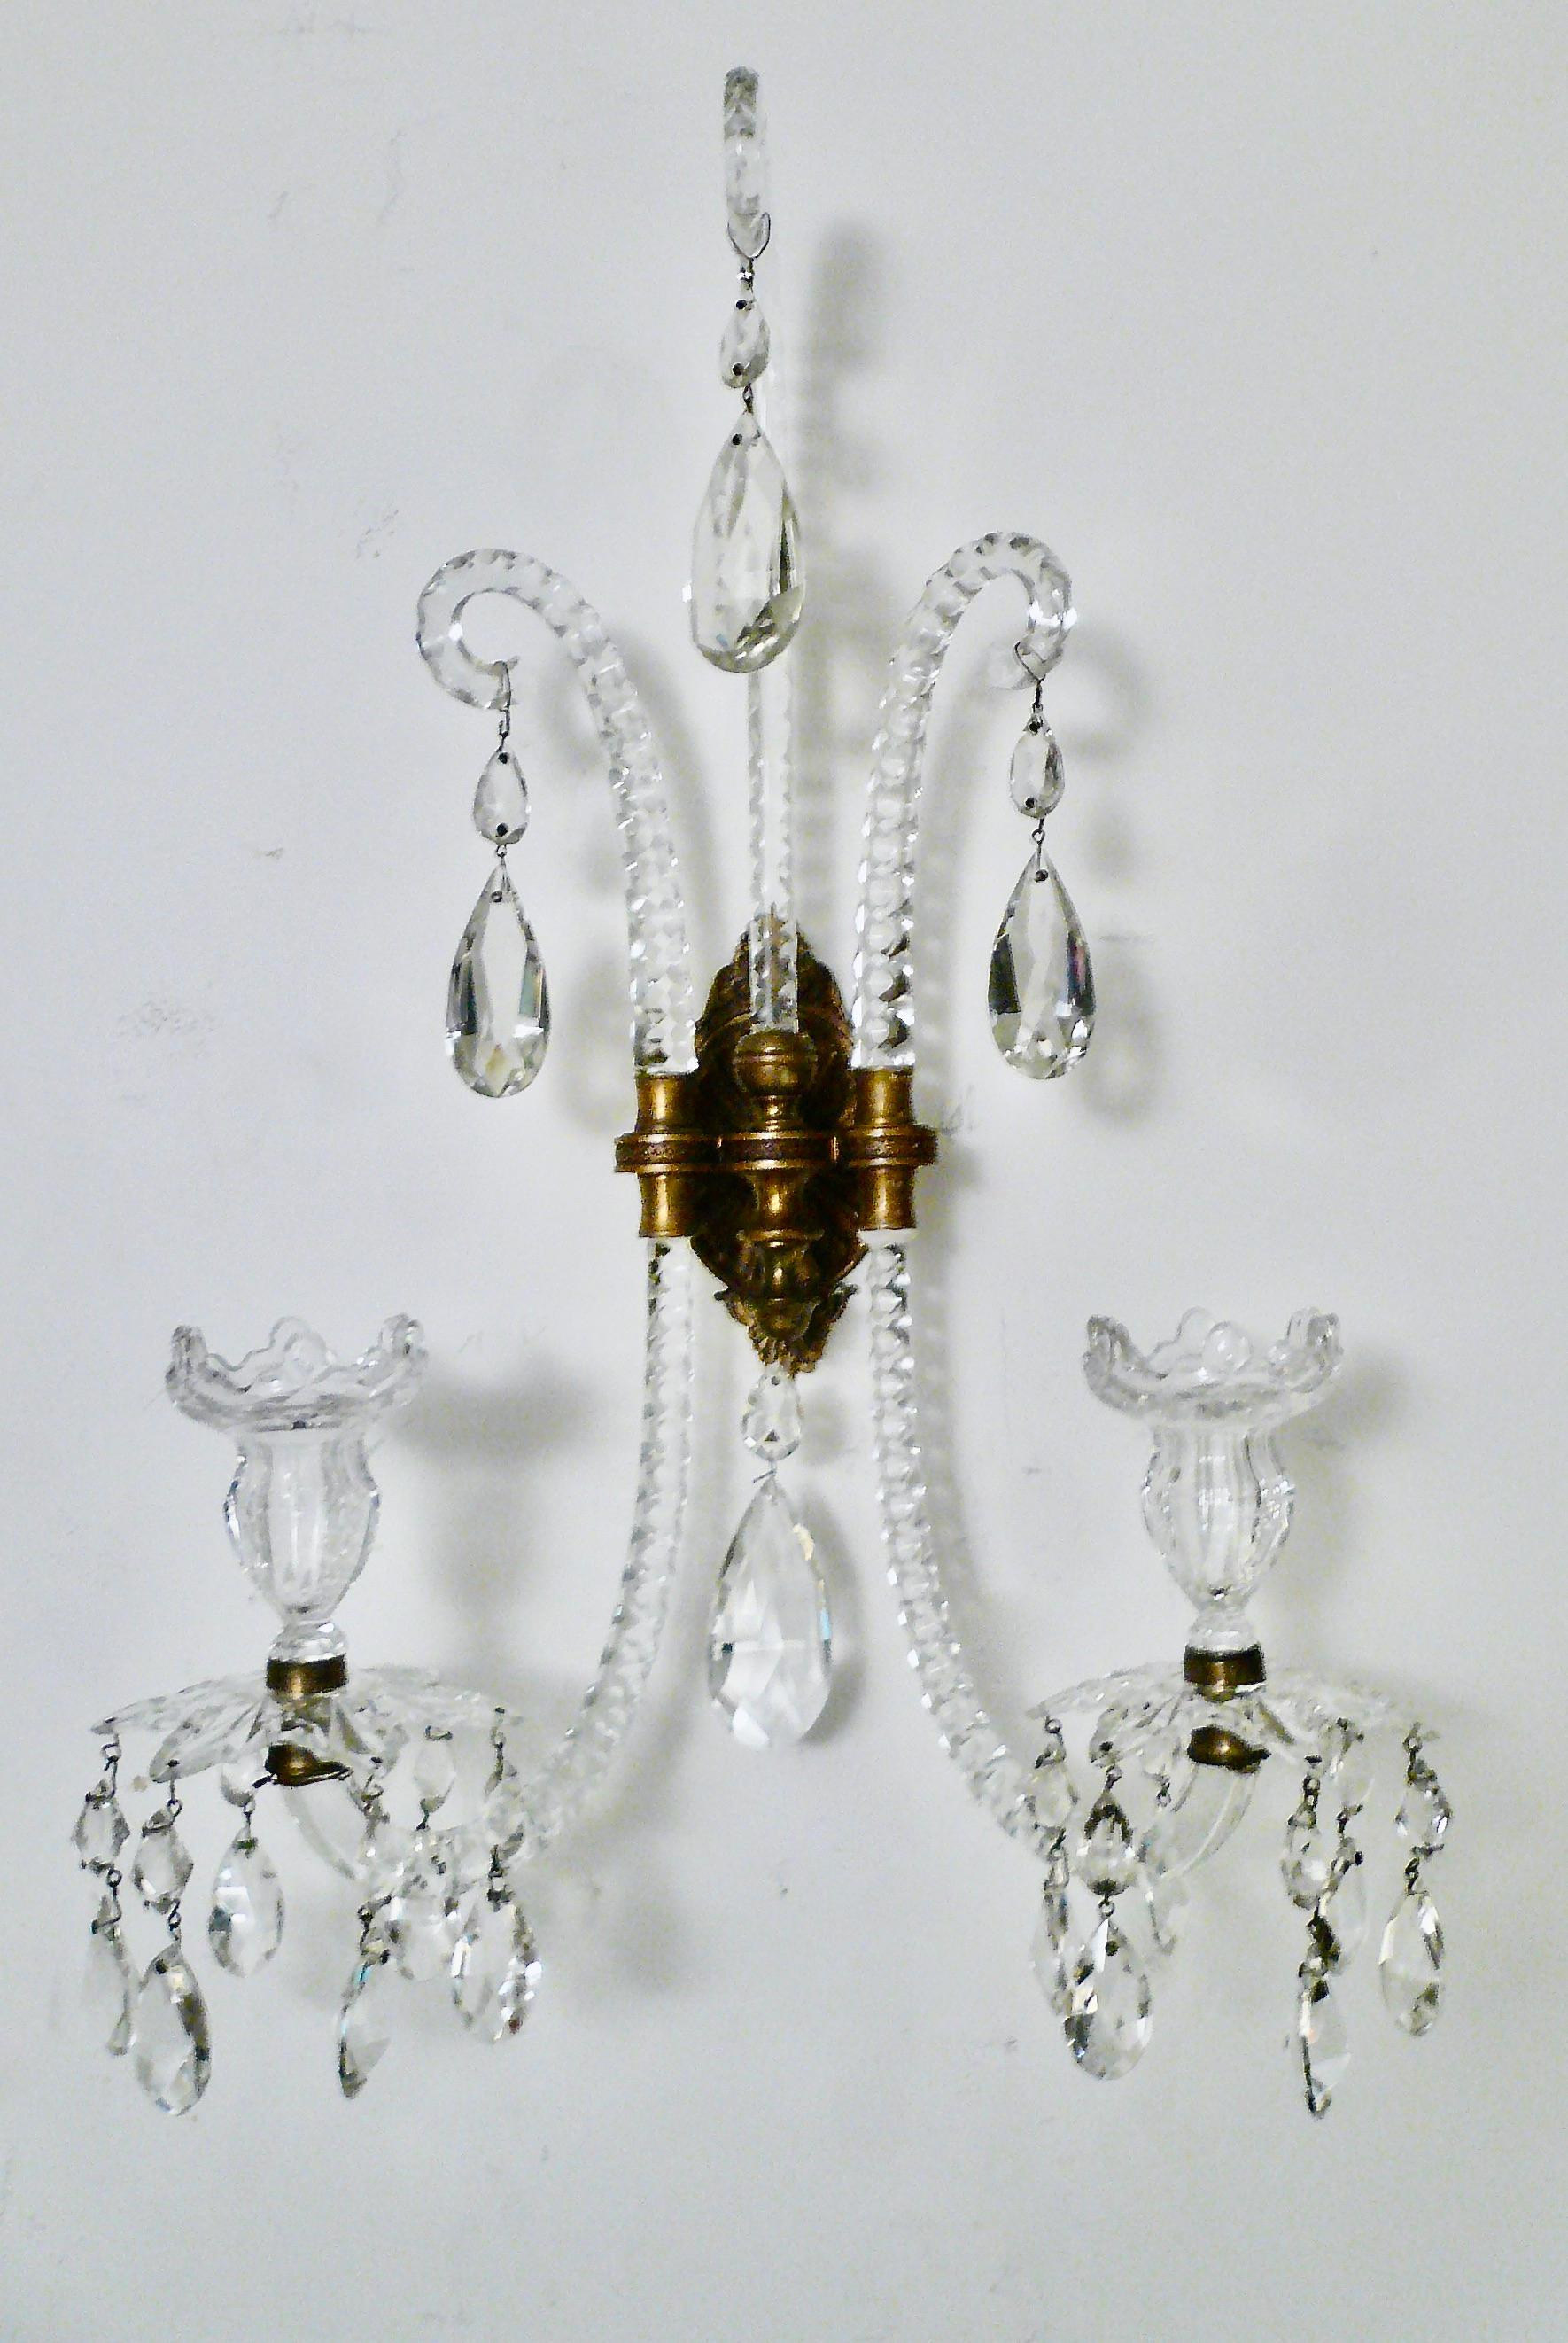  In the 1790s Moses Lafount invented a new design for chandeliers, candelabra, and wall brackets (sconces).  The essence of the design was that the arms should appear to pass vertically through the arm-plate in one continuous curve of glass. The